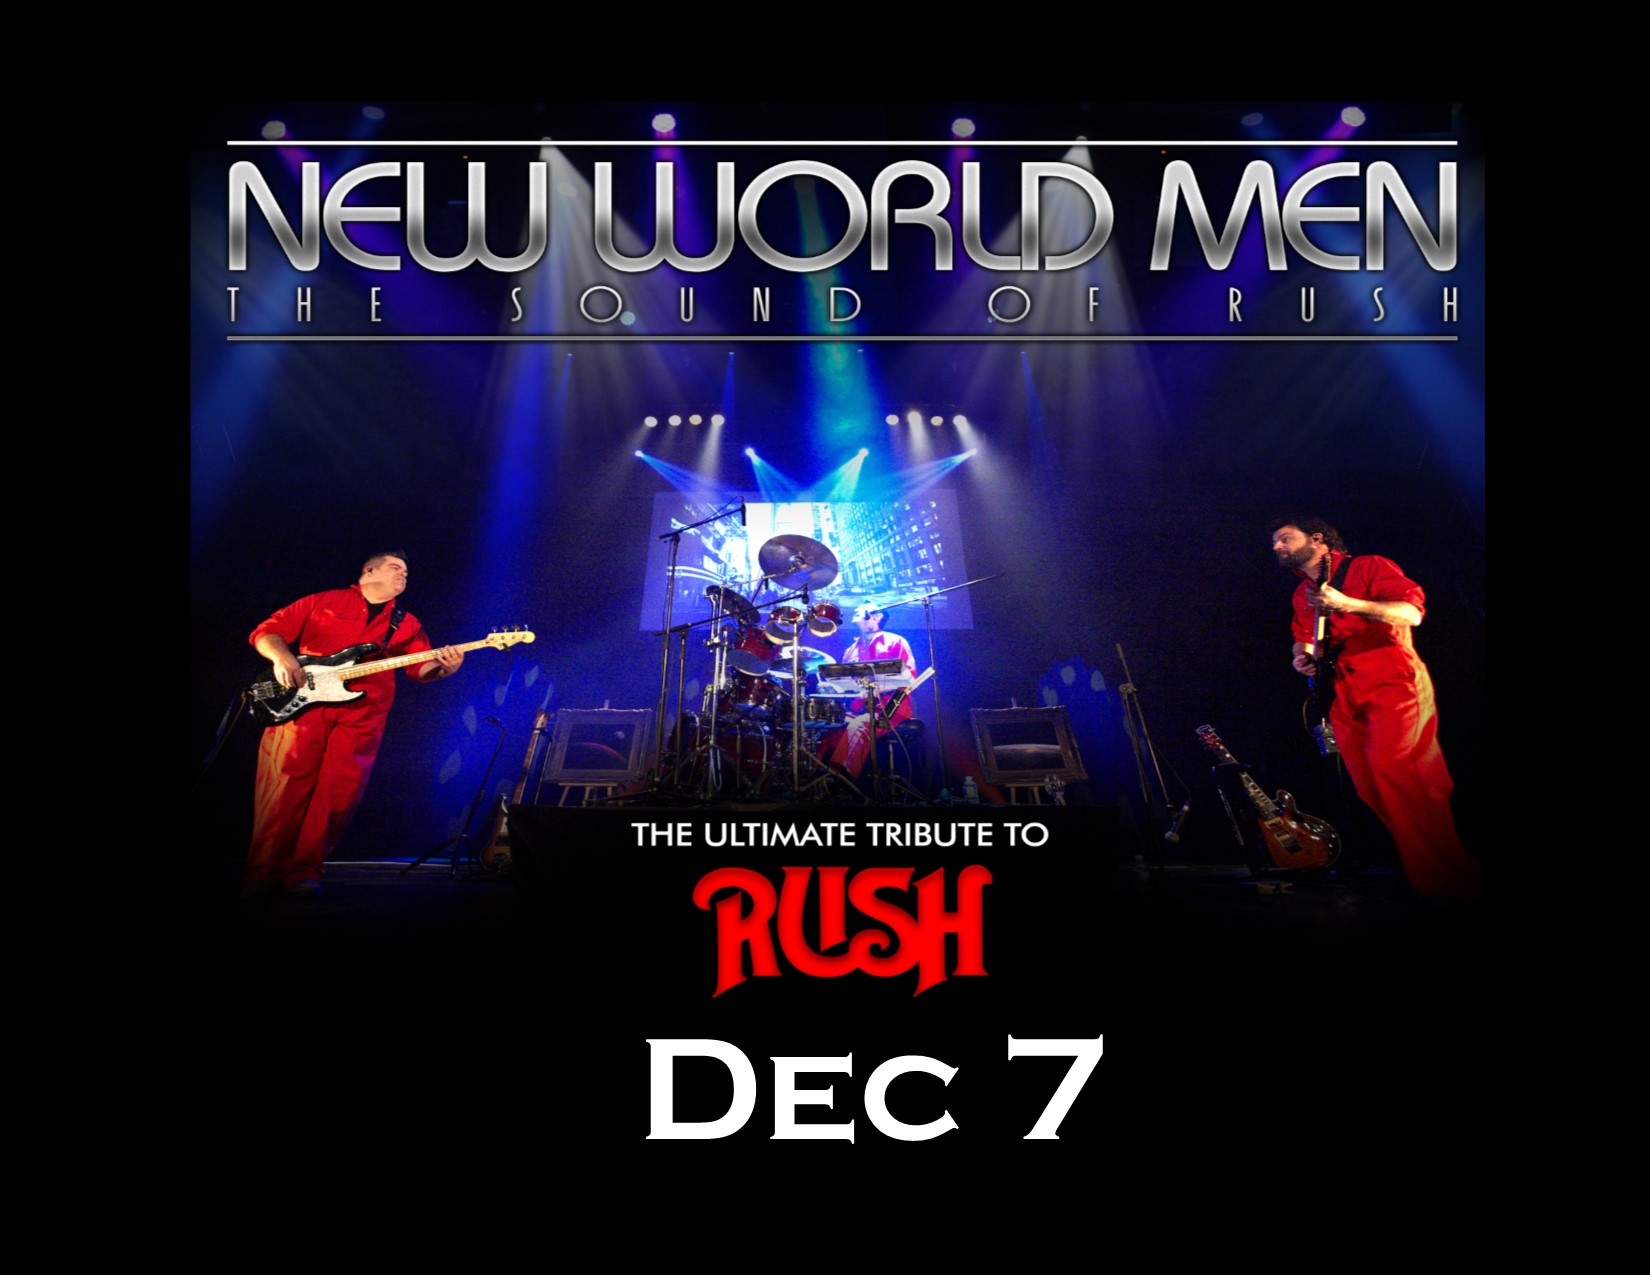 New World Men - A tribute to Rush